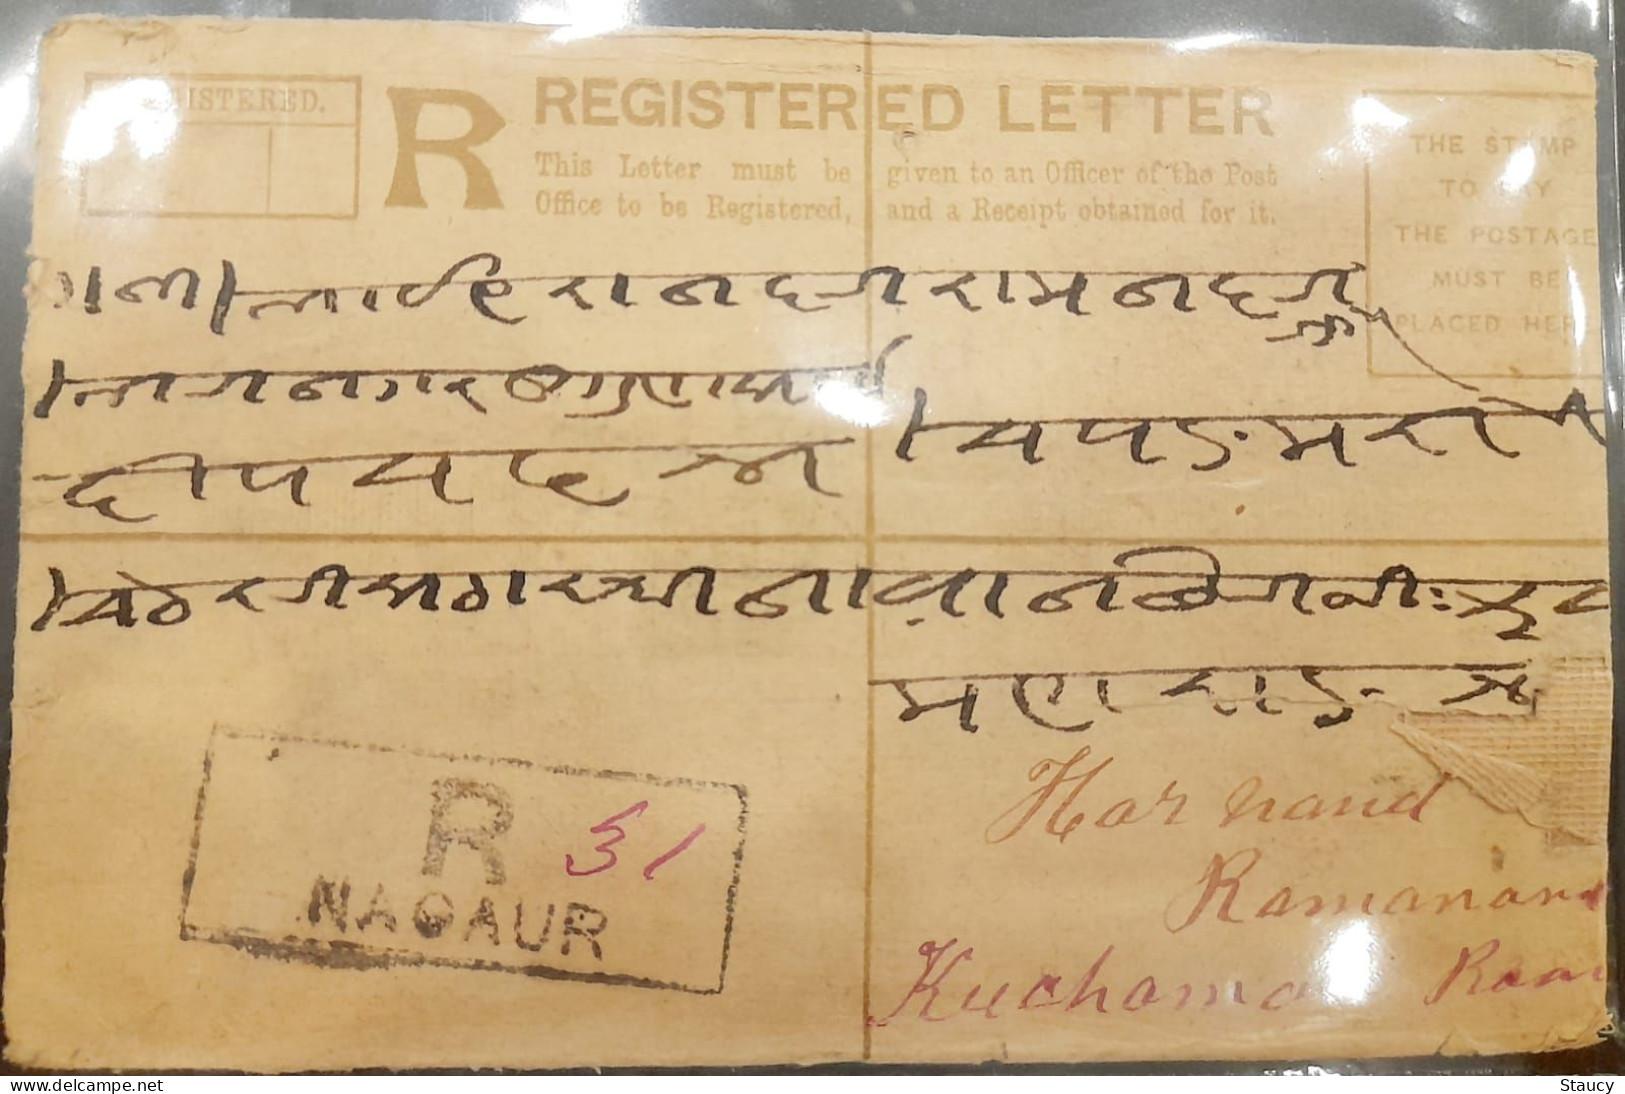 BRITISH INDIA 1902 QV 2a (Sg#117) FRANKING On QV 2a Stationery Registered COVER, NICE CANC ON FRONT & BACK, Per Scan - Jaipur